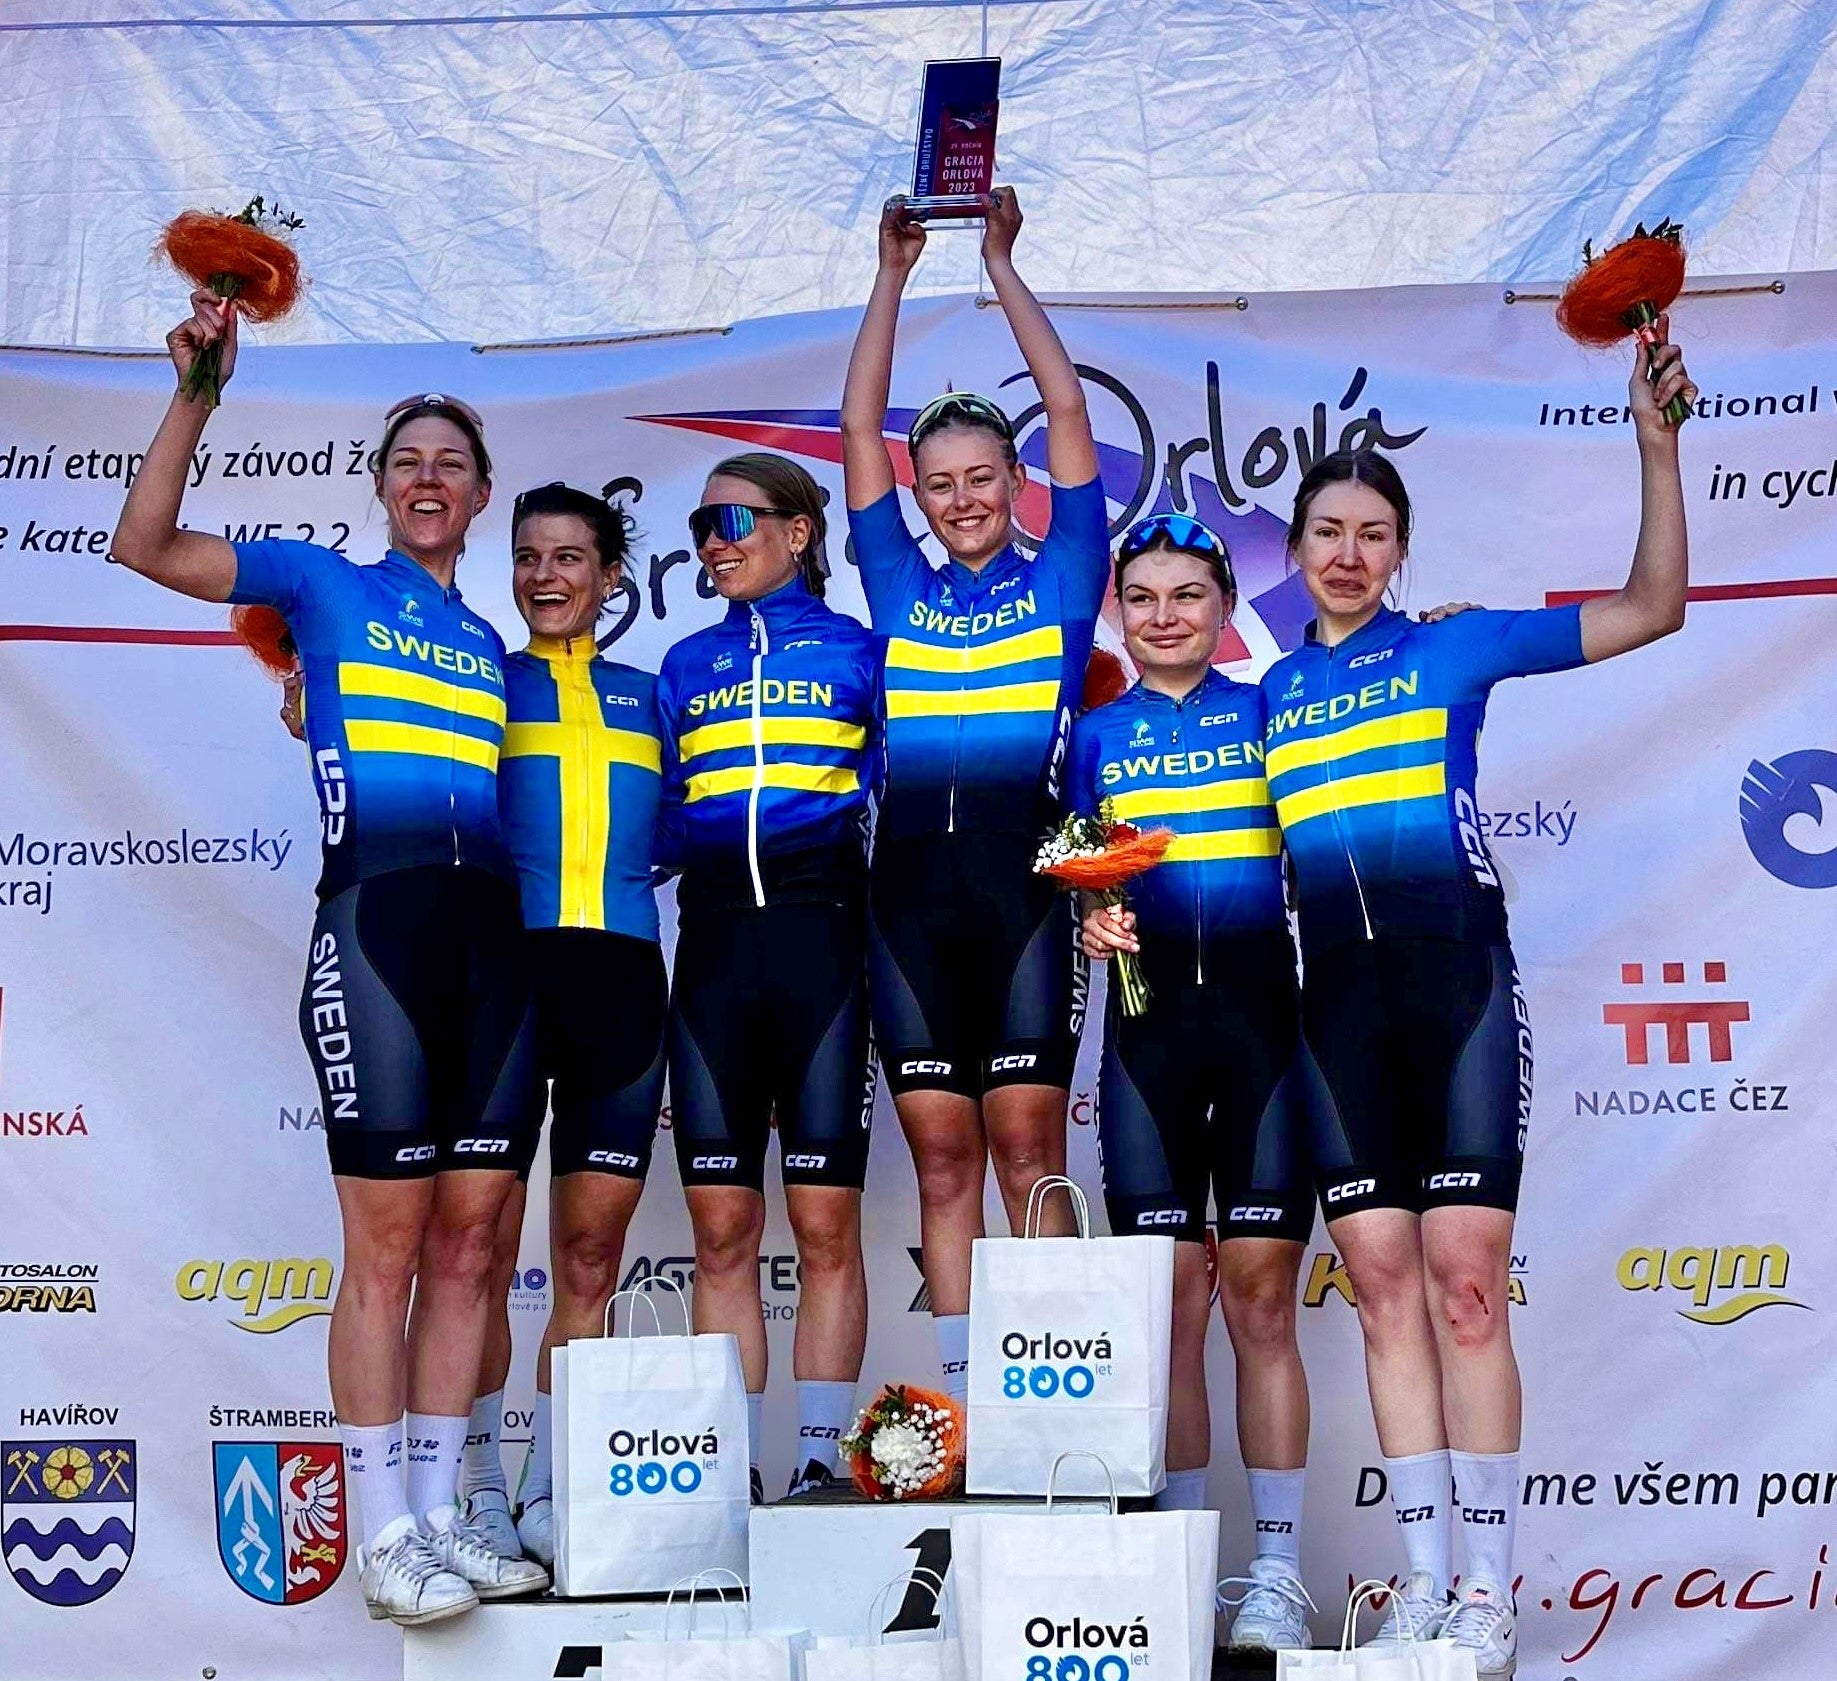 Swedish National Team: Rissveds' Triumphal Victory in Gracia Orlová